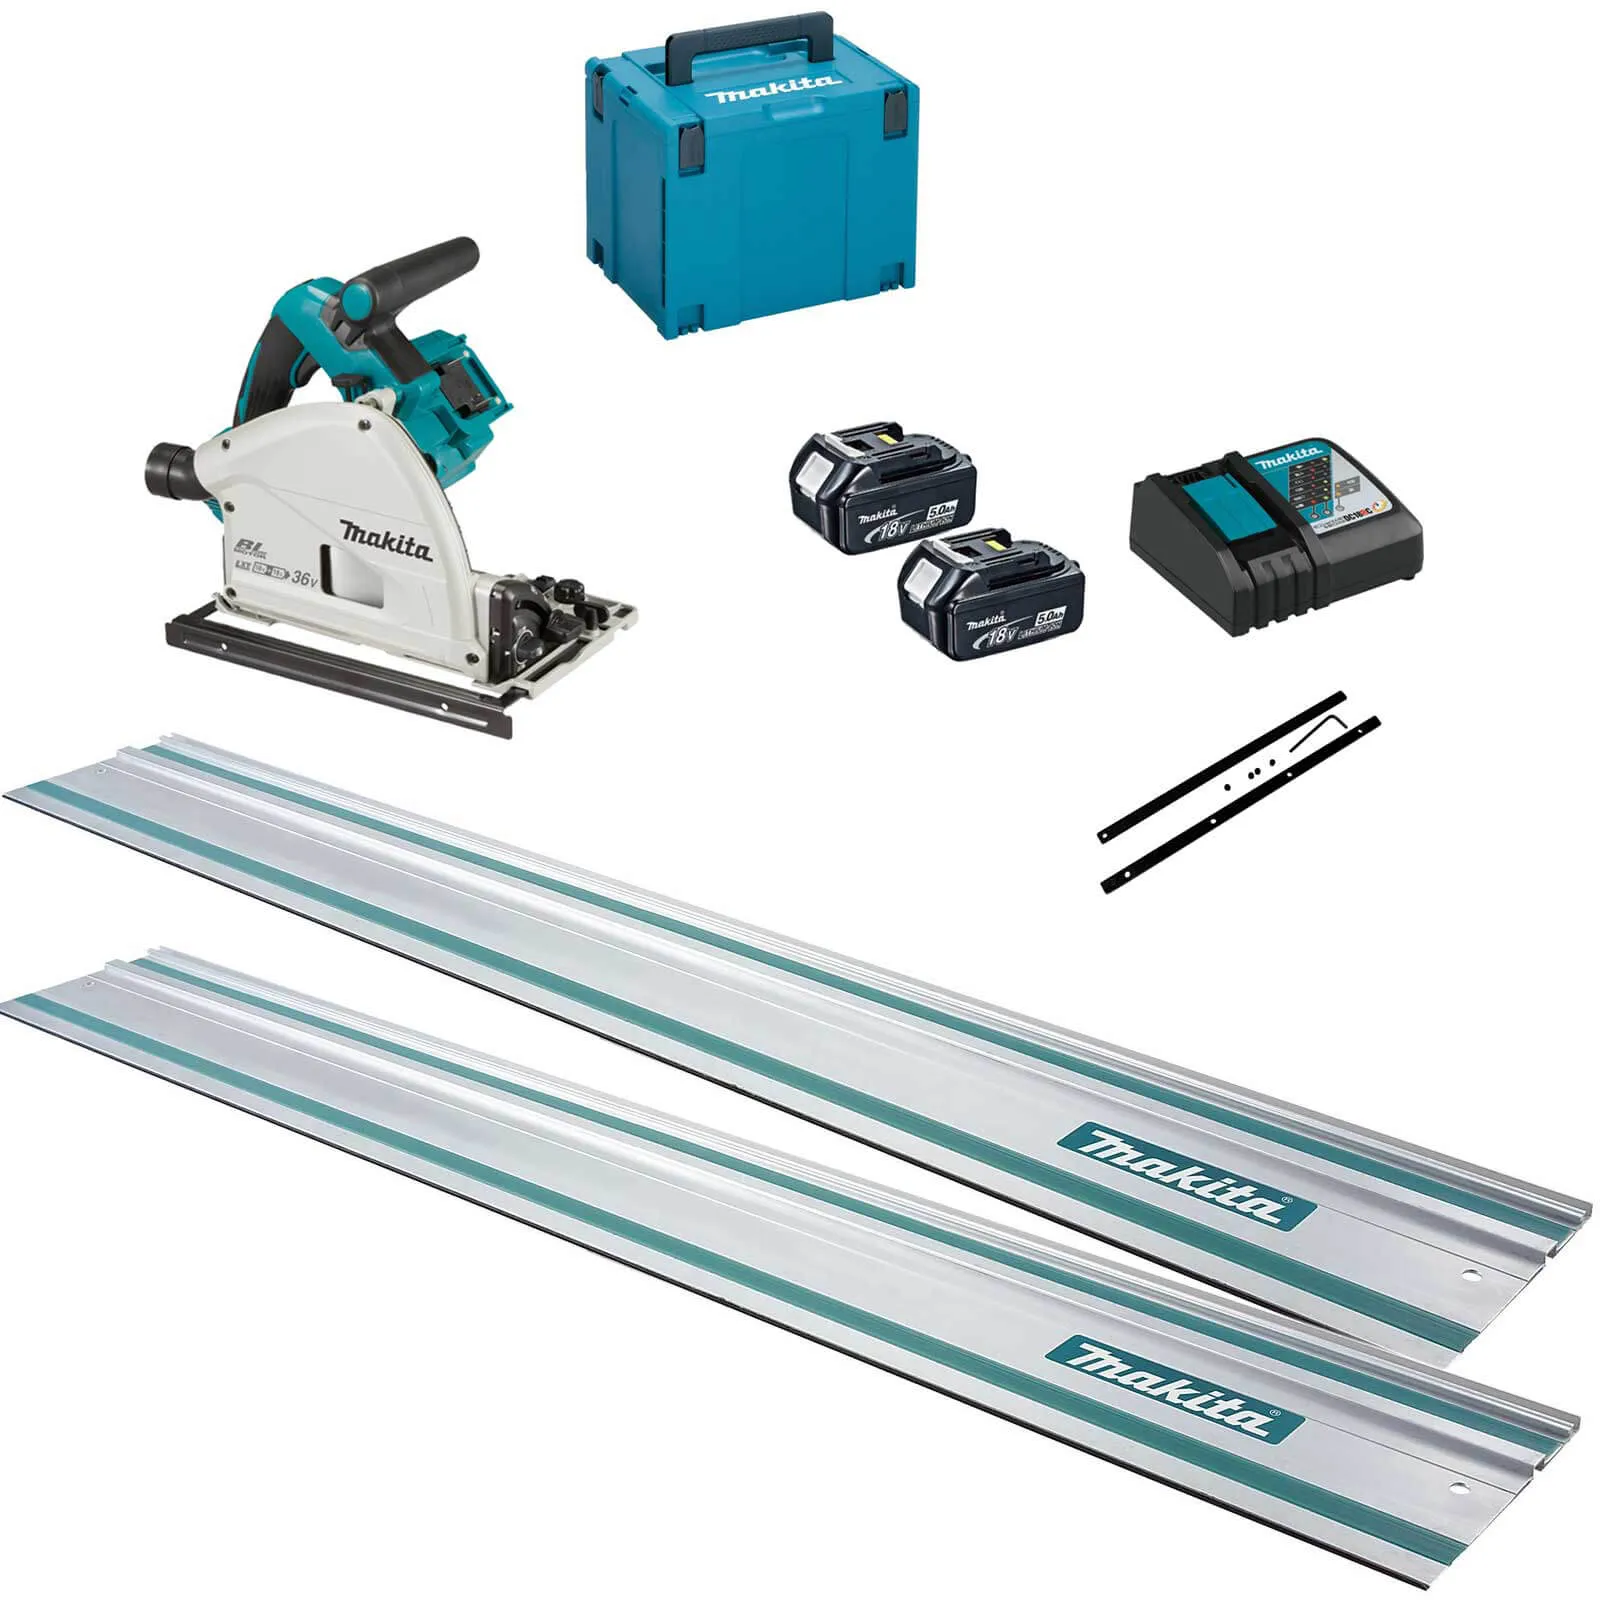 Makita DSP600ZJ Twin 18v LXT Cordless Brushless Plunge Saw 3 Piece Kit - 2 x 5ah Li-ion, Charger, Case & Accessories